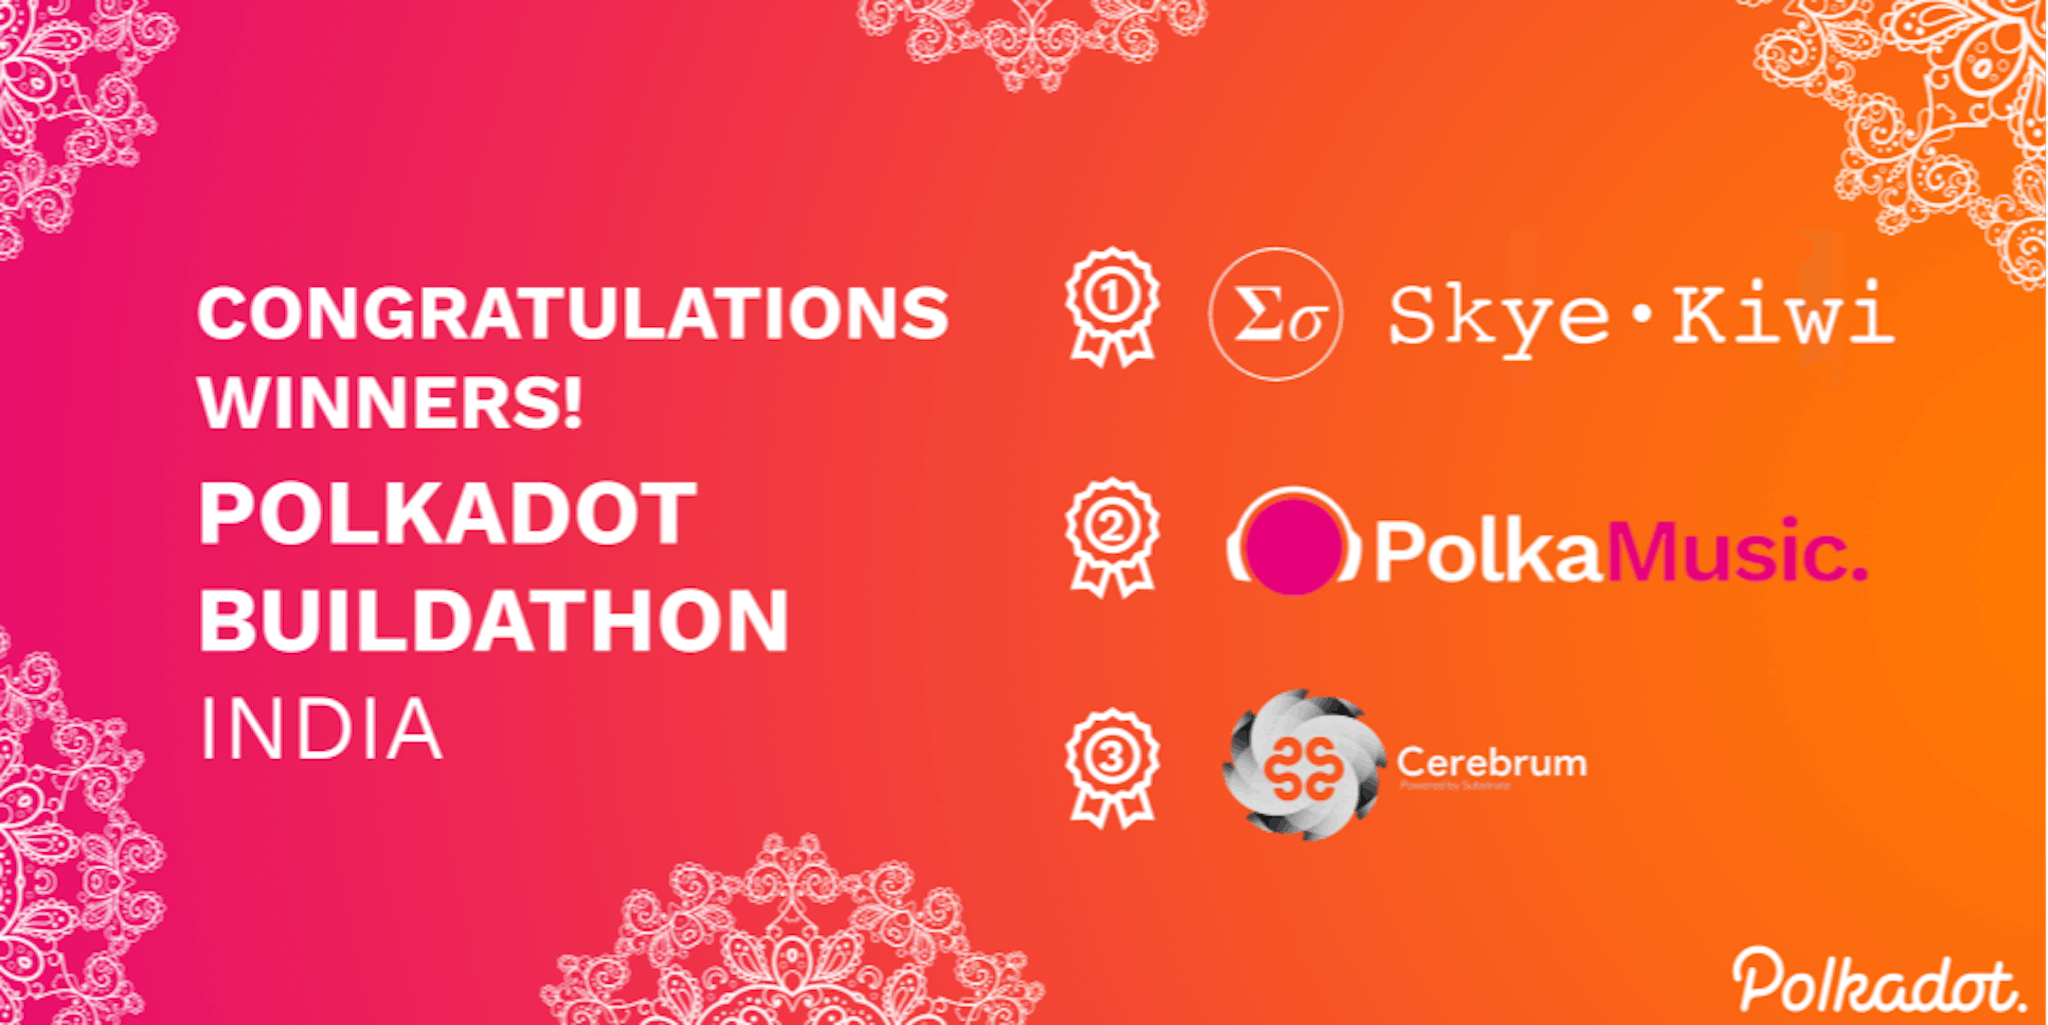 featured image - Meet the winners of the Polkadot Buildathon: India